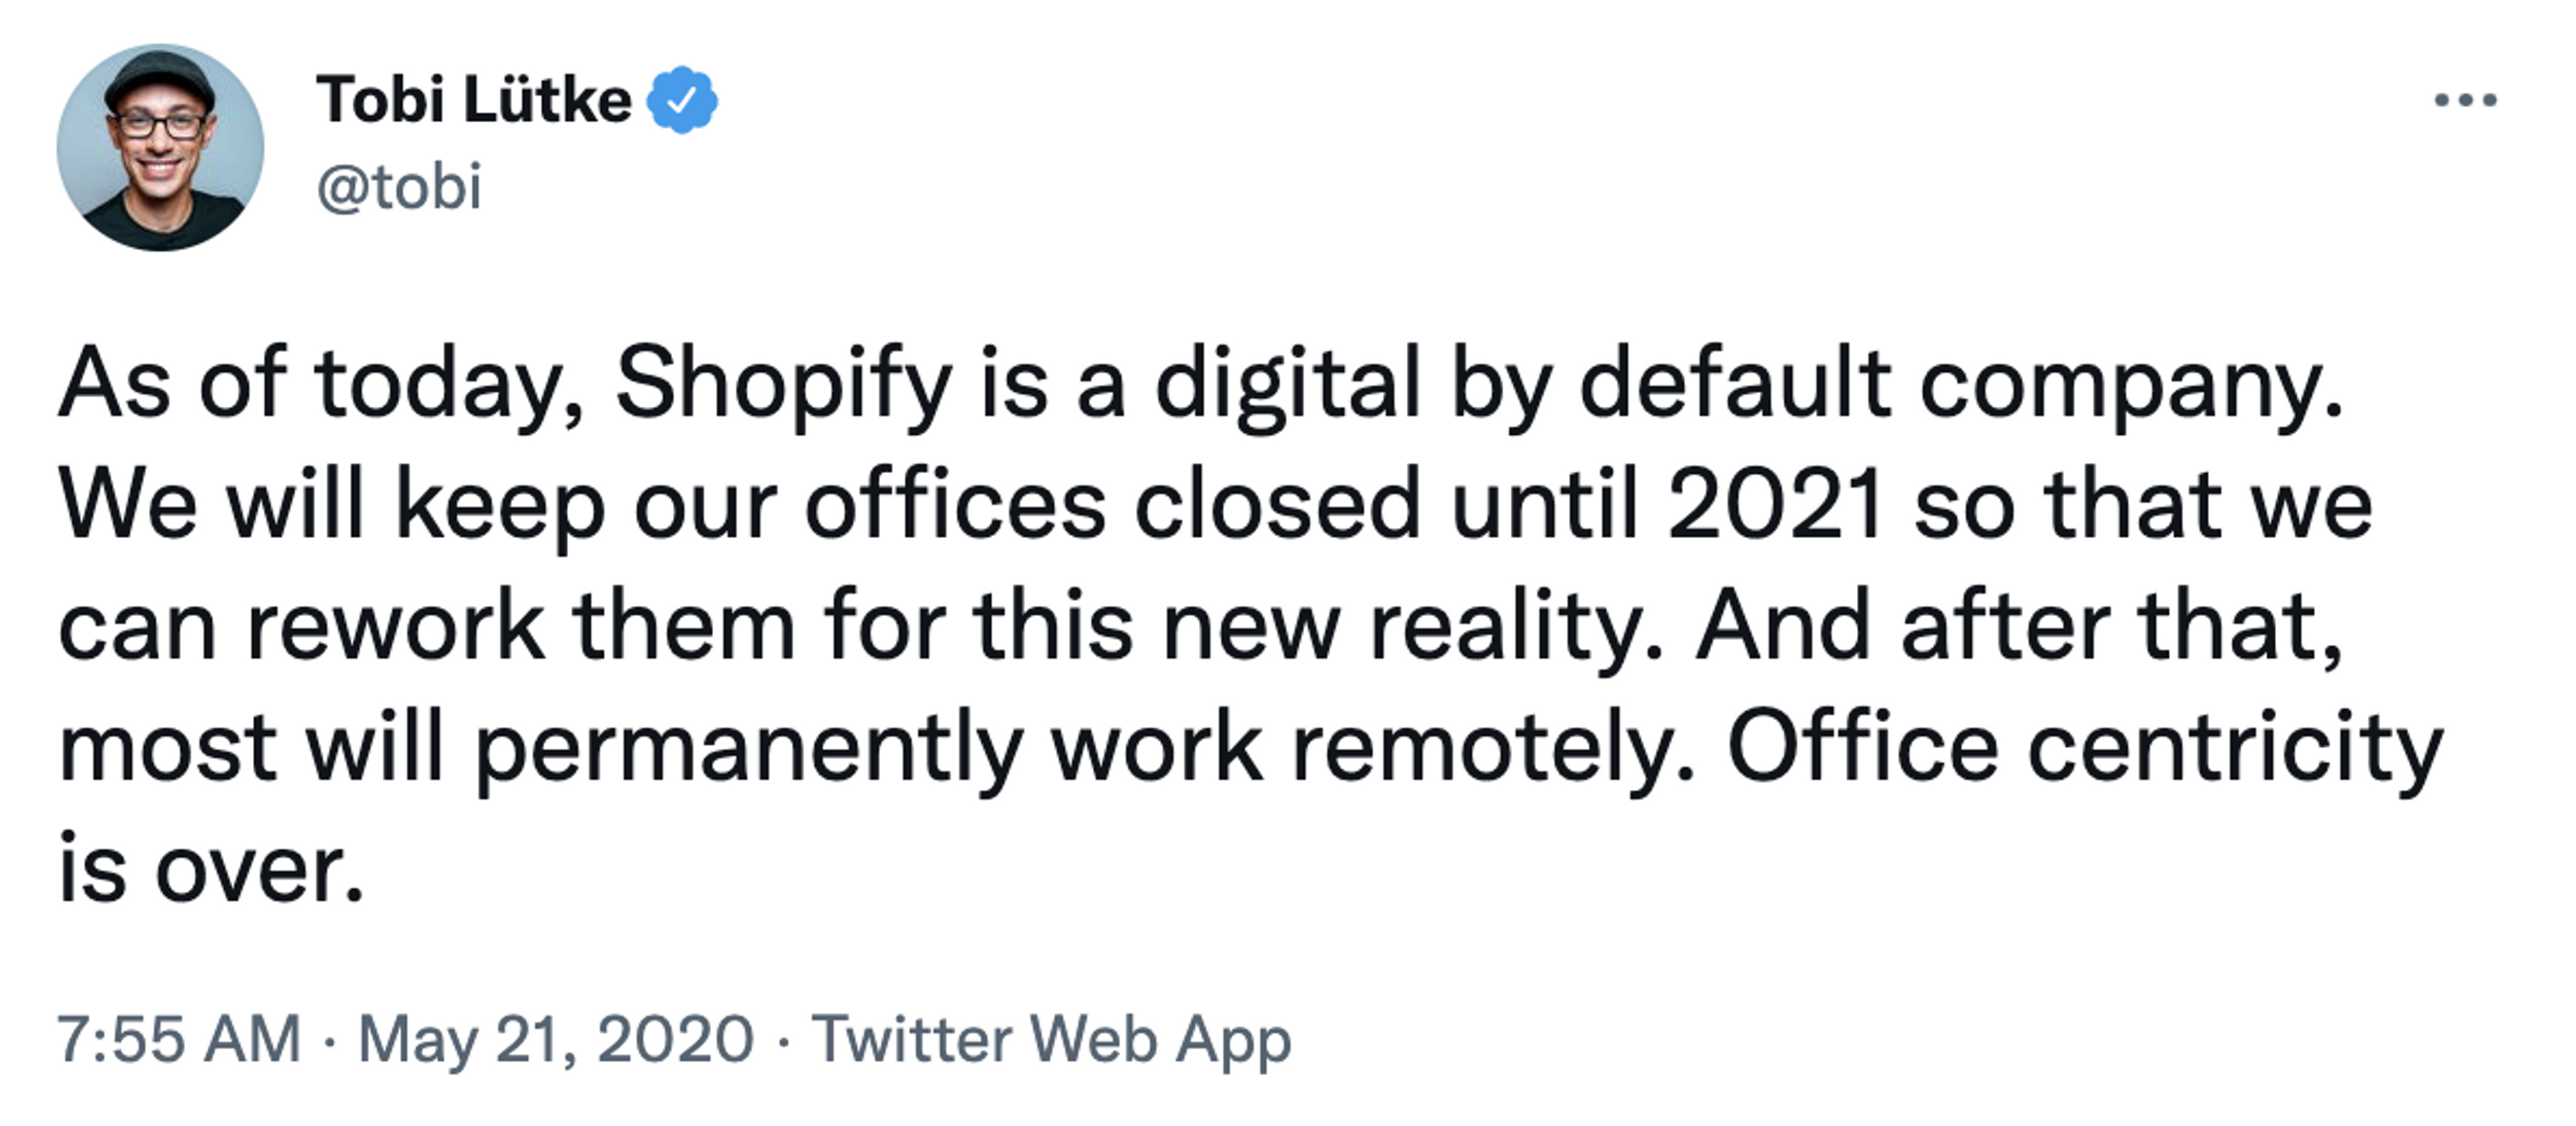 Tweet from @tobi: As of today, Shopify is a digital by default company. We will keep our offices closed until 2021 so that we can rework them for this new reality. And after that, most will permanently work remotely. Office centricity is over.